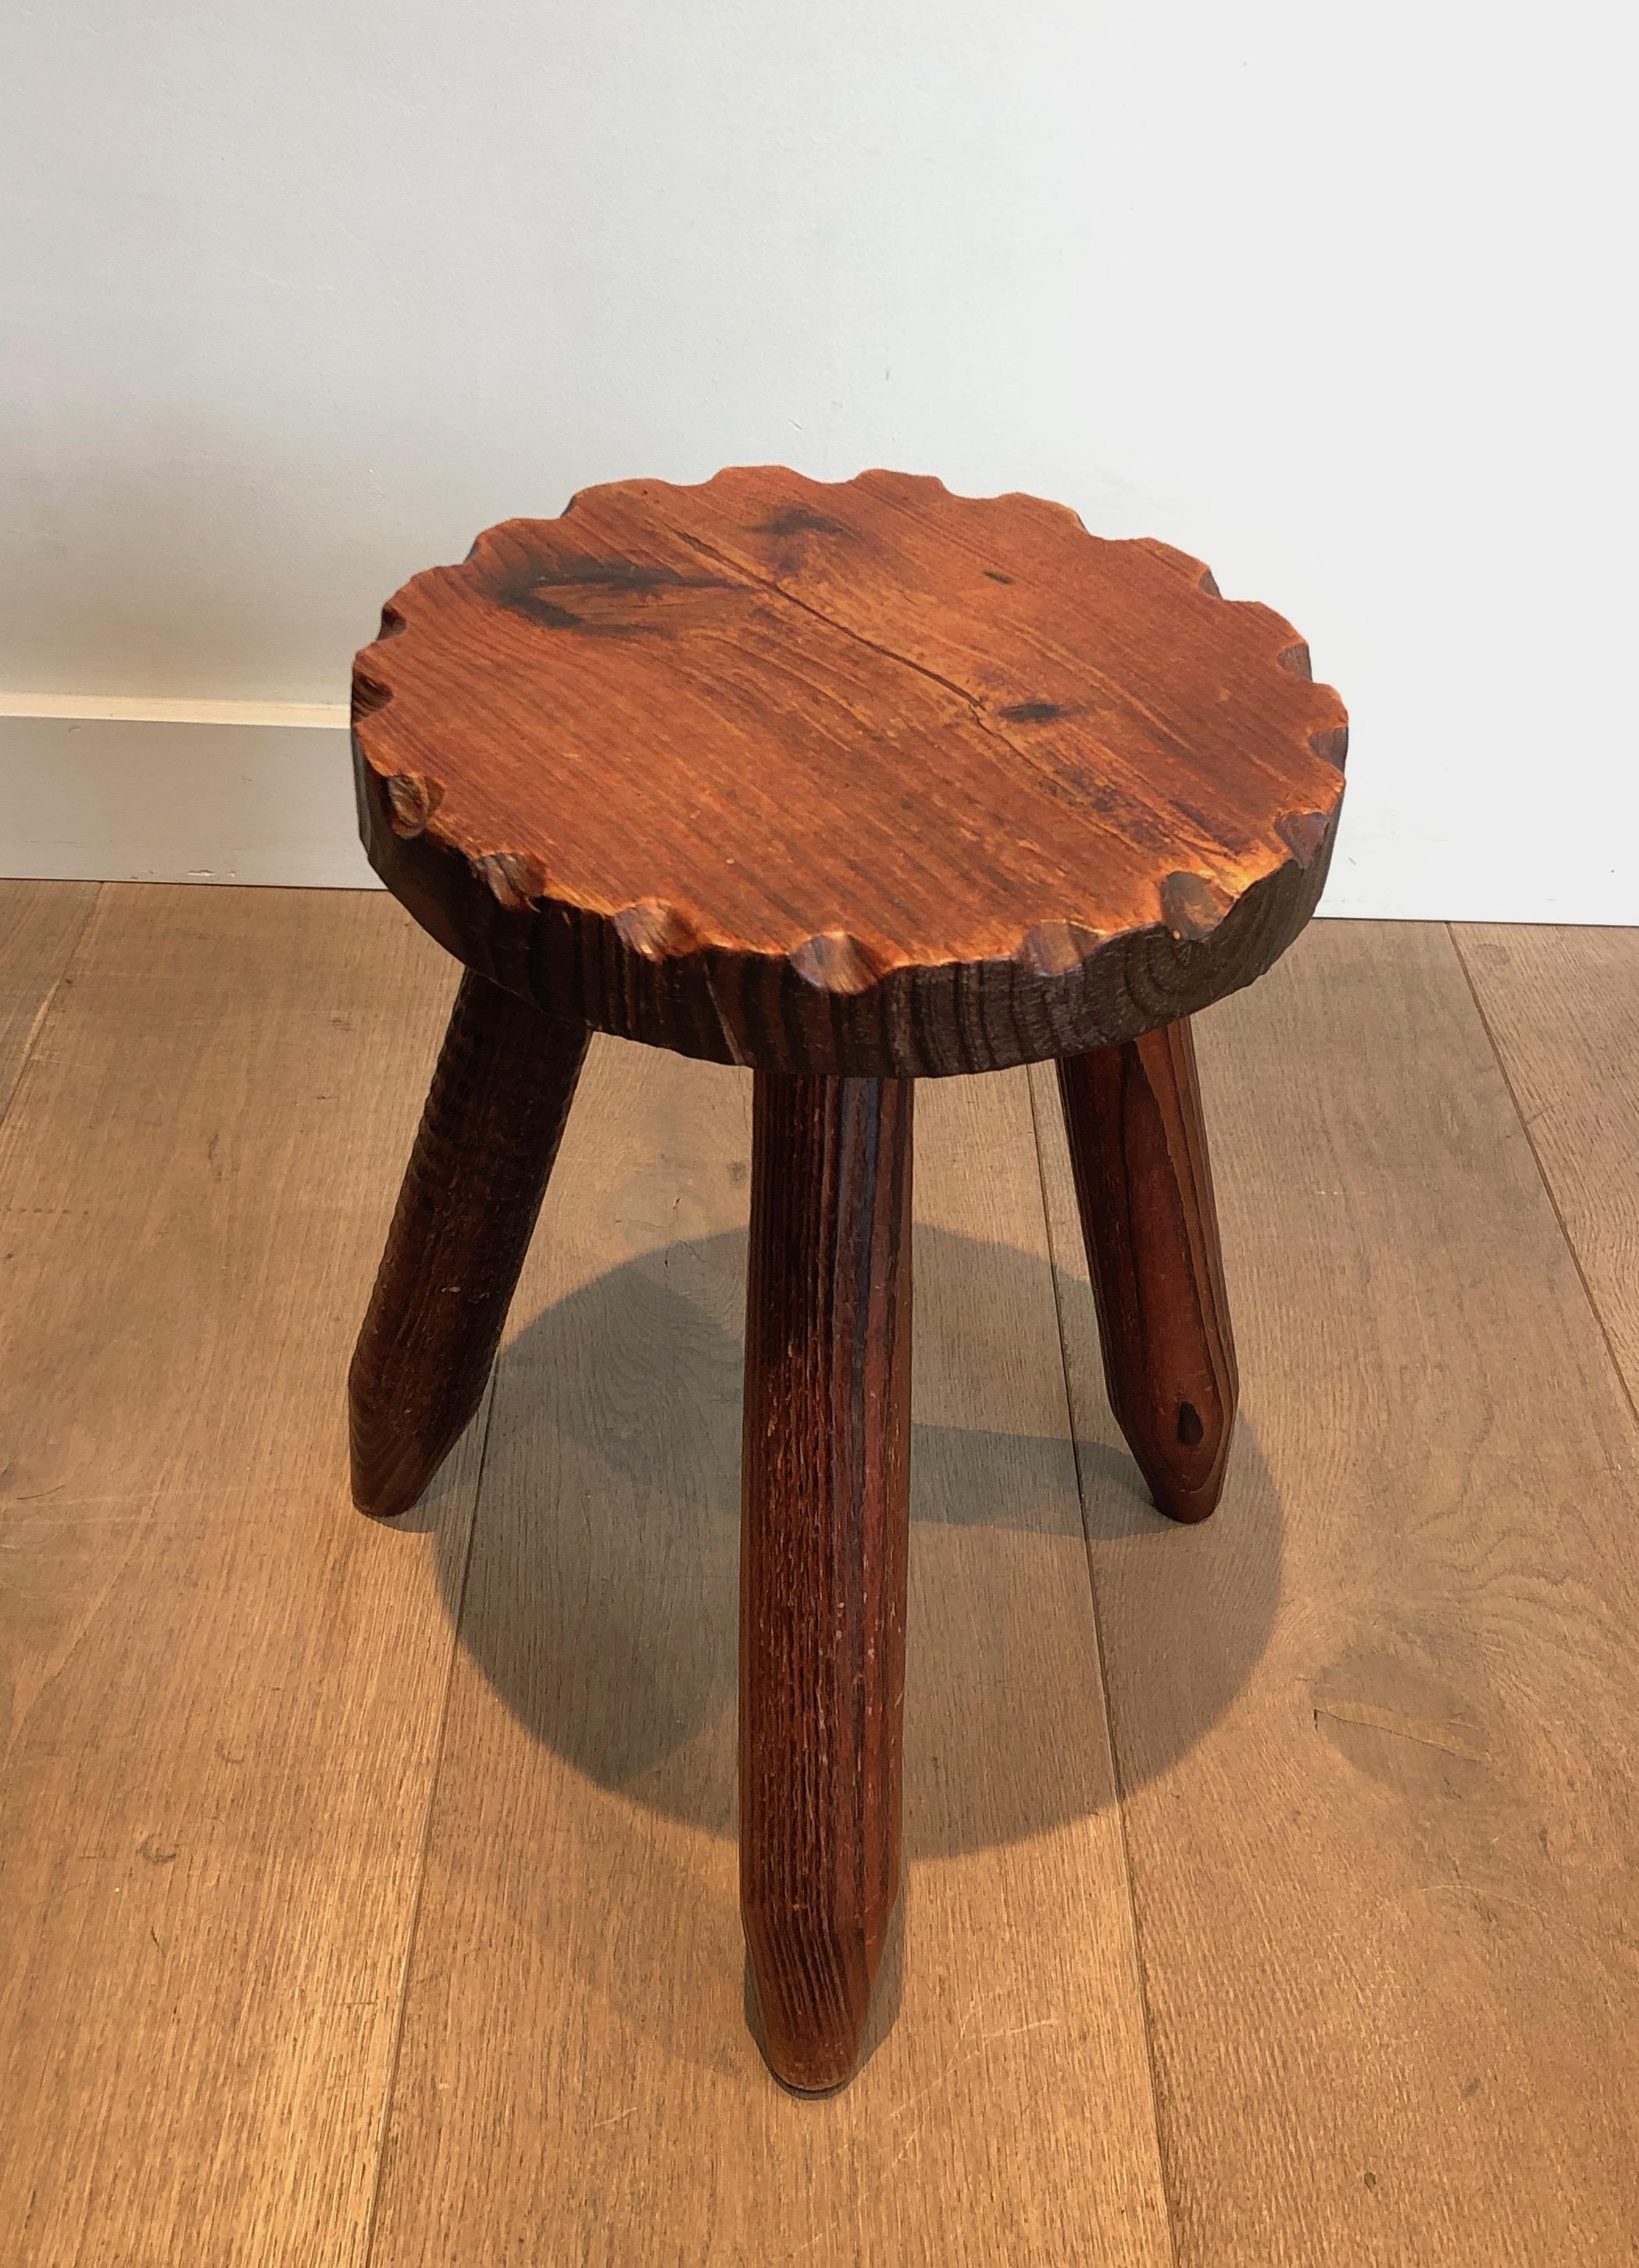 Pair of Pine Brutalist Stools, French Work, circa 1950 For Sale 1